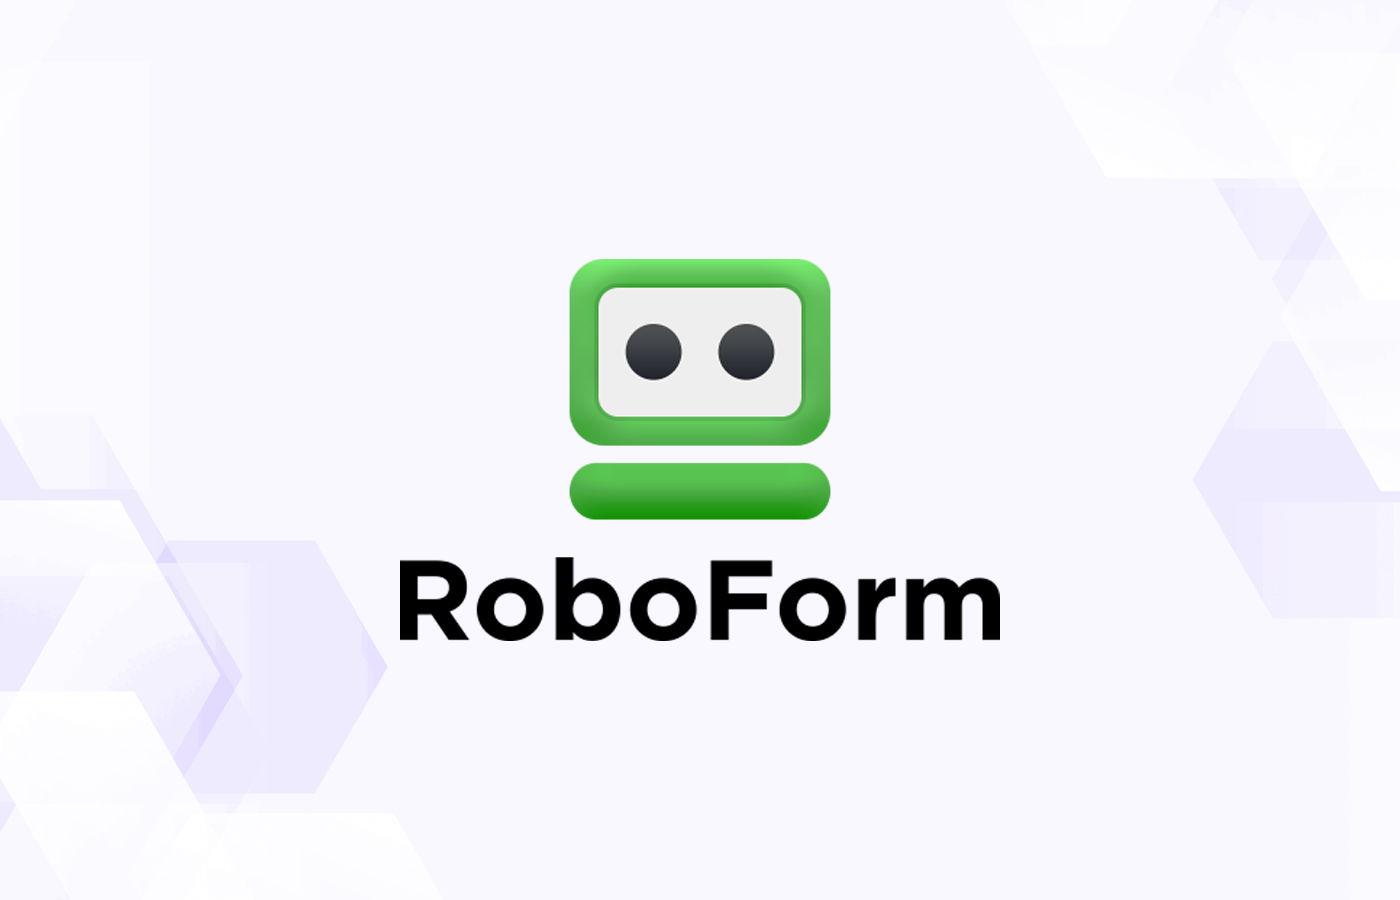 Featured review graphic with RoboForm logo.